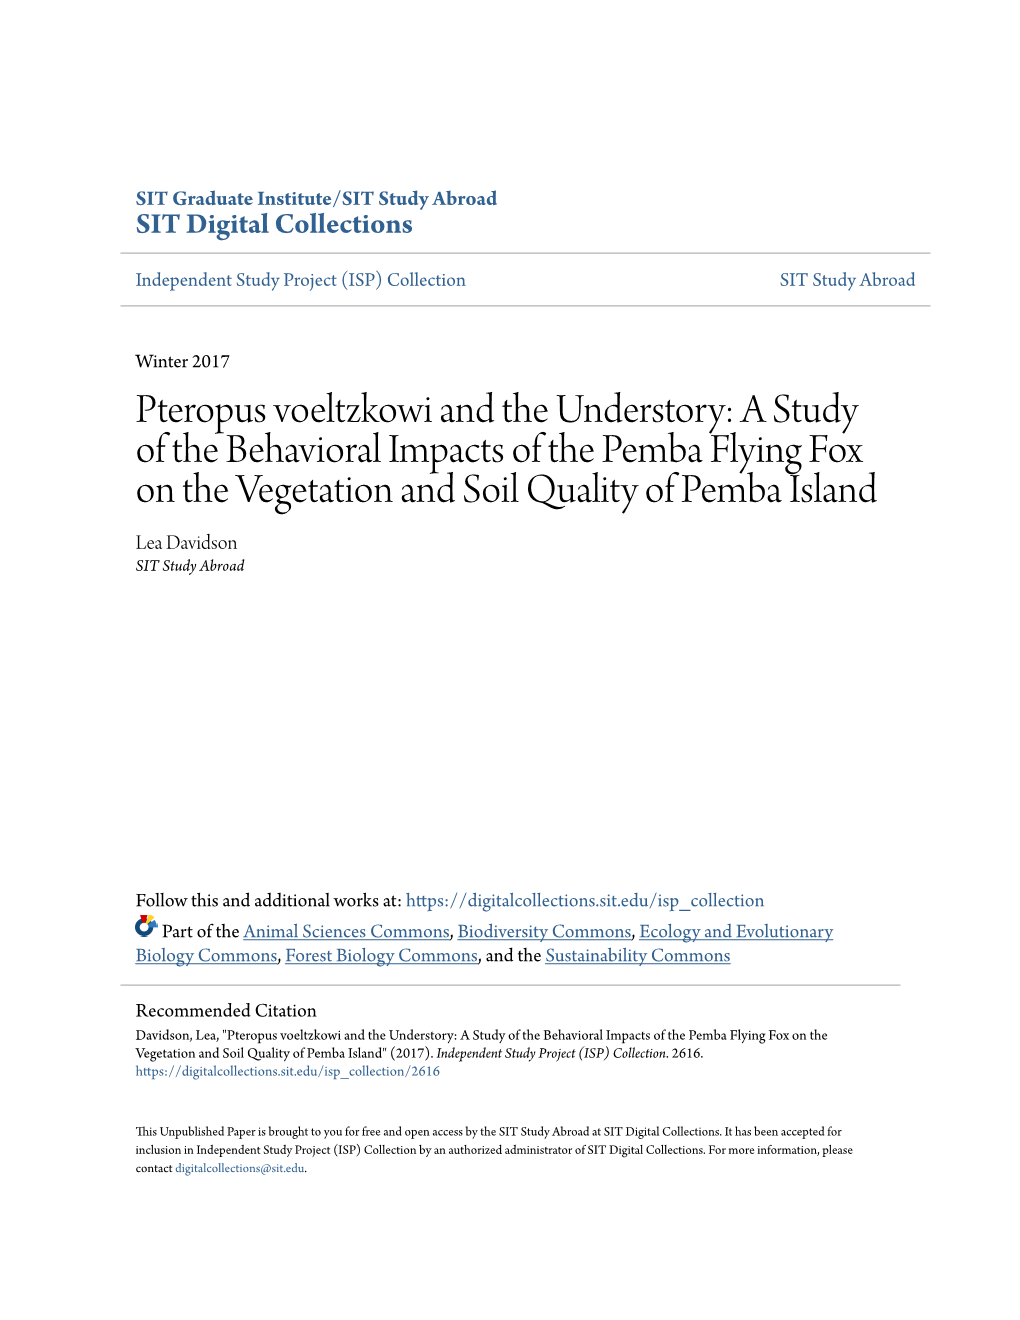 A Study of the Behavioral Impacts of the Pemba Flying Fox on the Vegetation and Soil Quality of Pemba Island Lea Davidson SIT Study Abroad